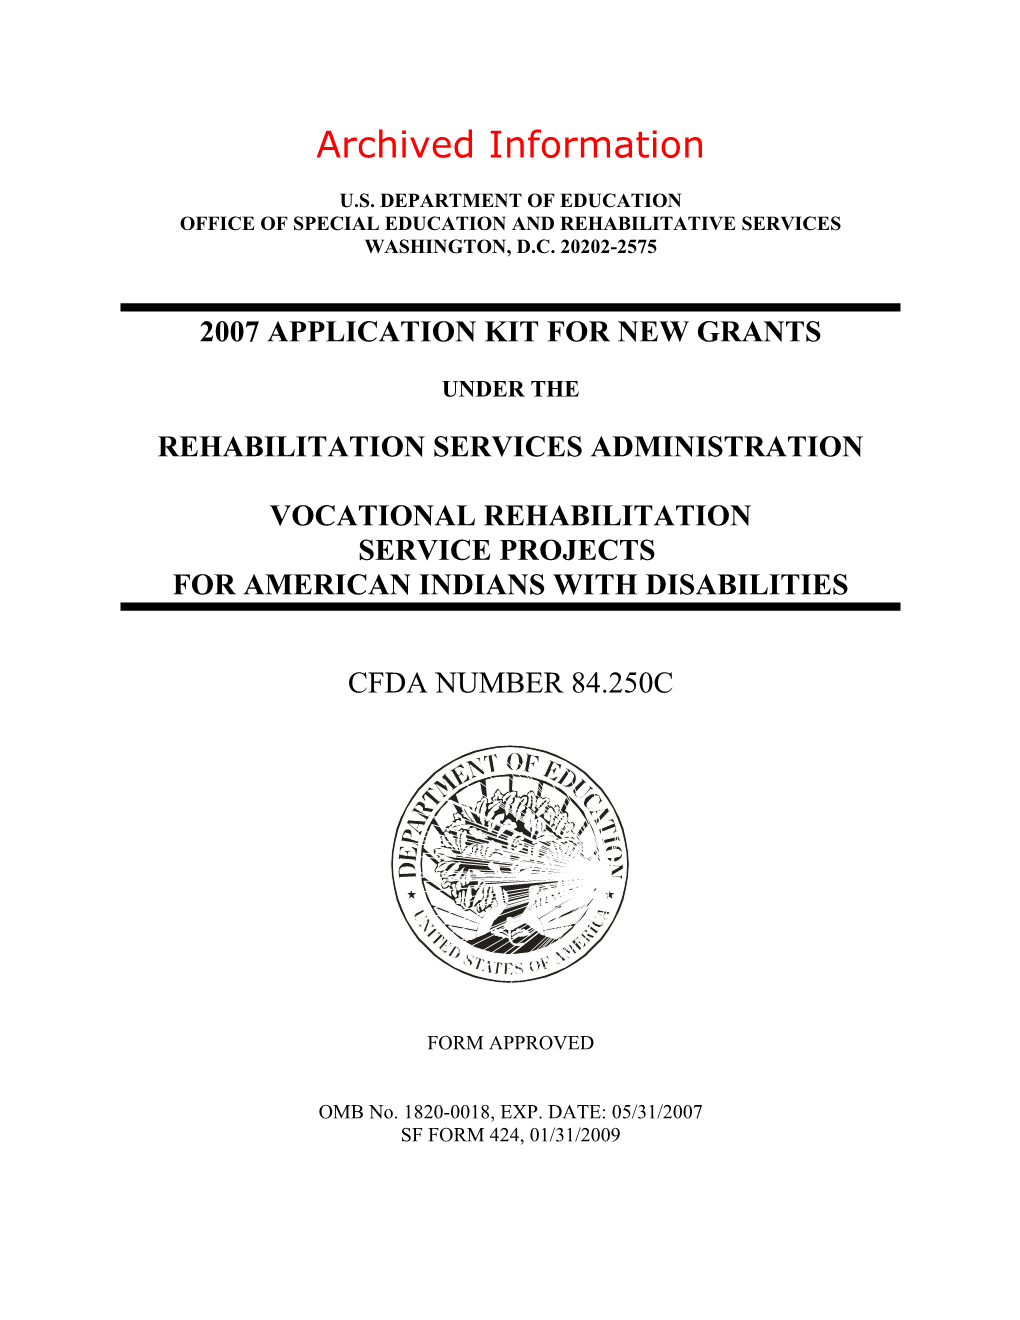 Archived: FY07 Application Kit for New Grants Under the Rehabilitation Services Administration